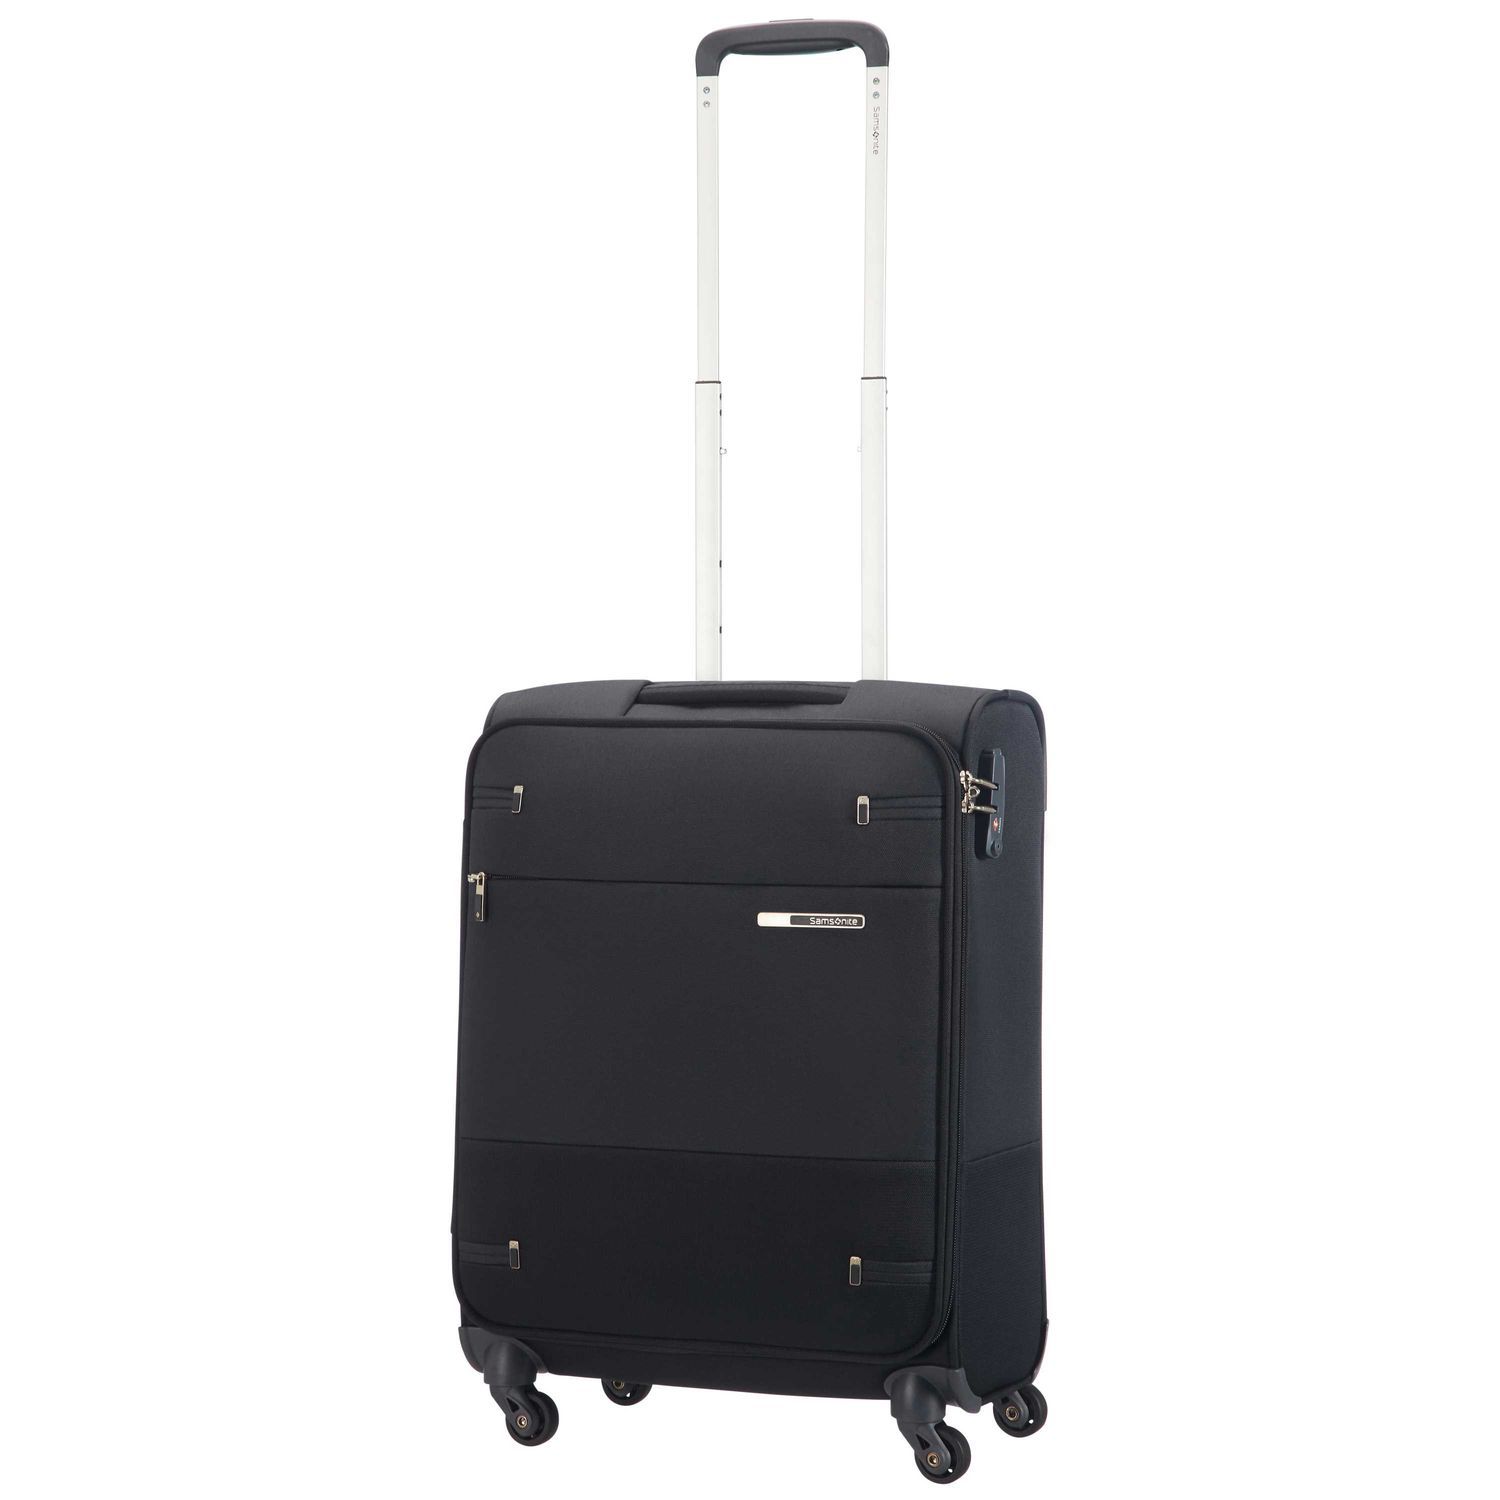 Samsonite Base Boost Spinner Carry-On Luggage